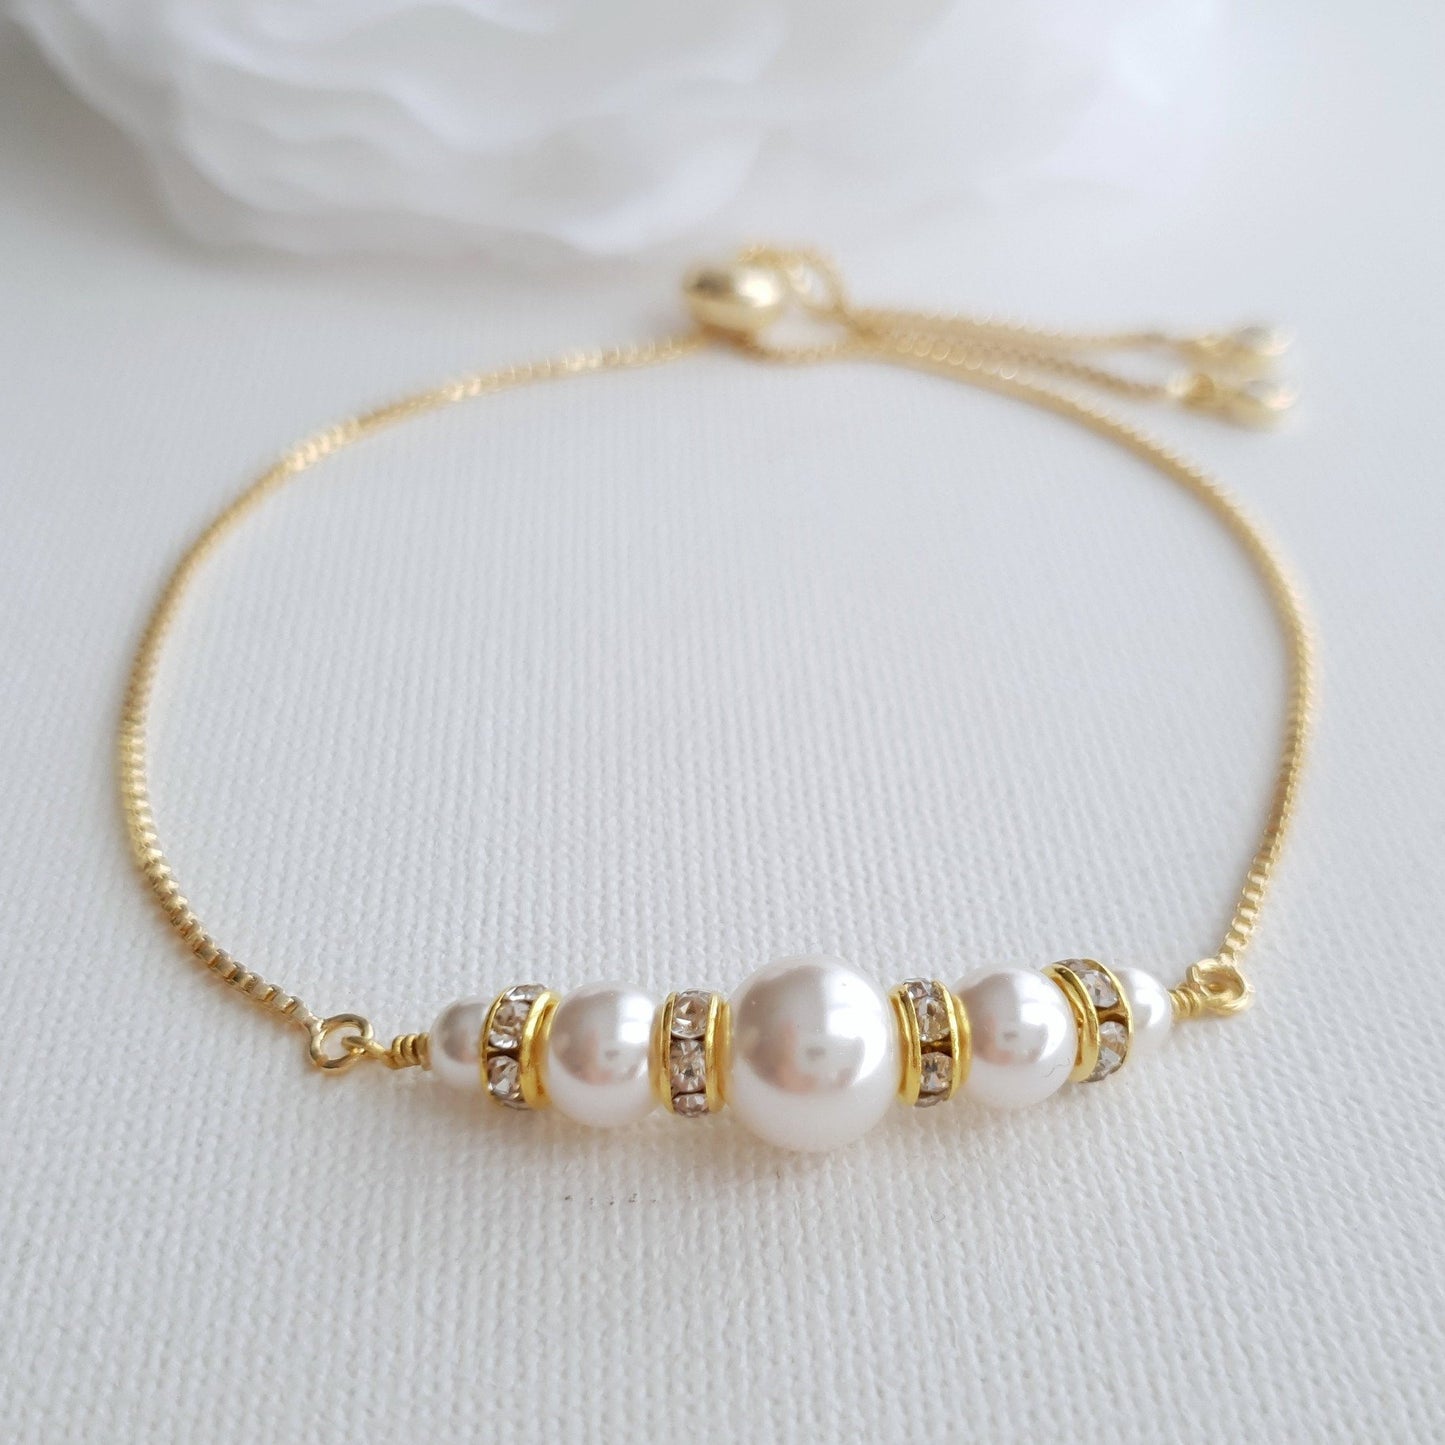 14K Gold Plated Pearl Bracelet for Brides and Weddings